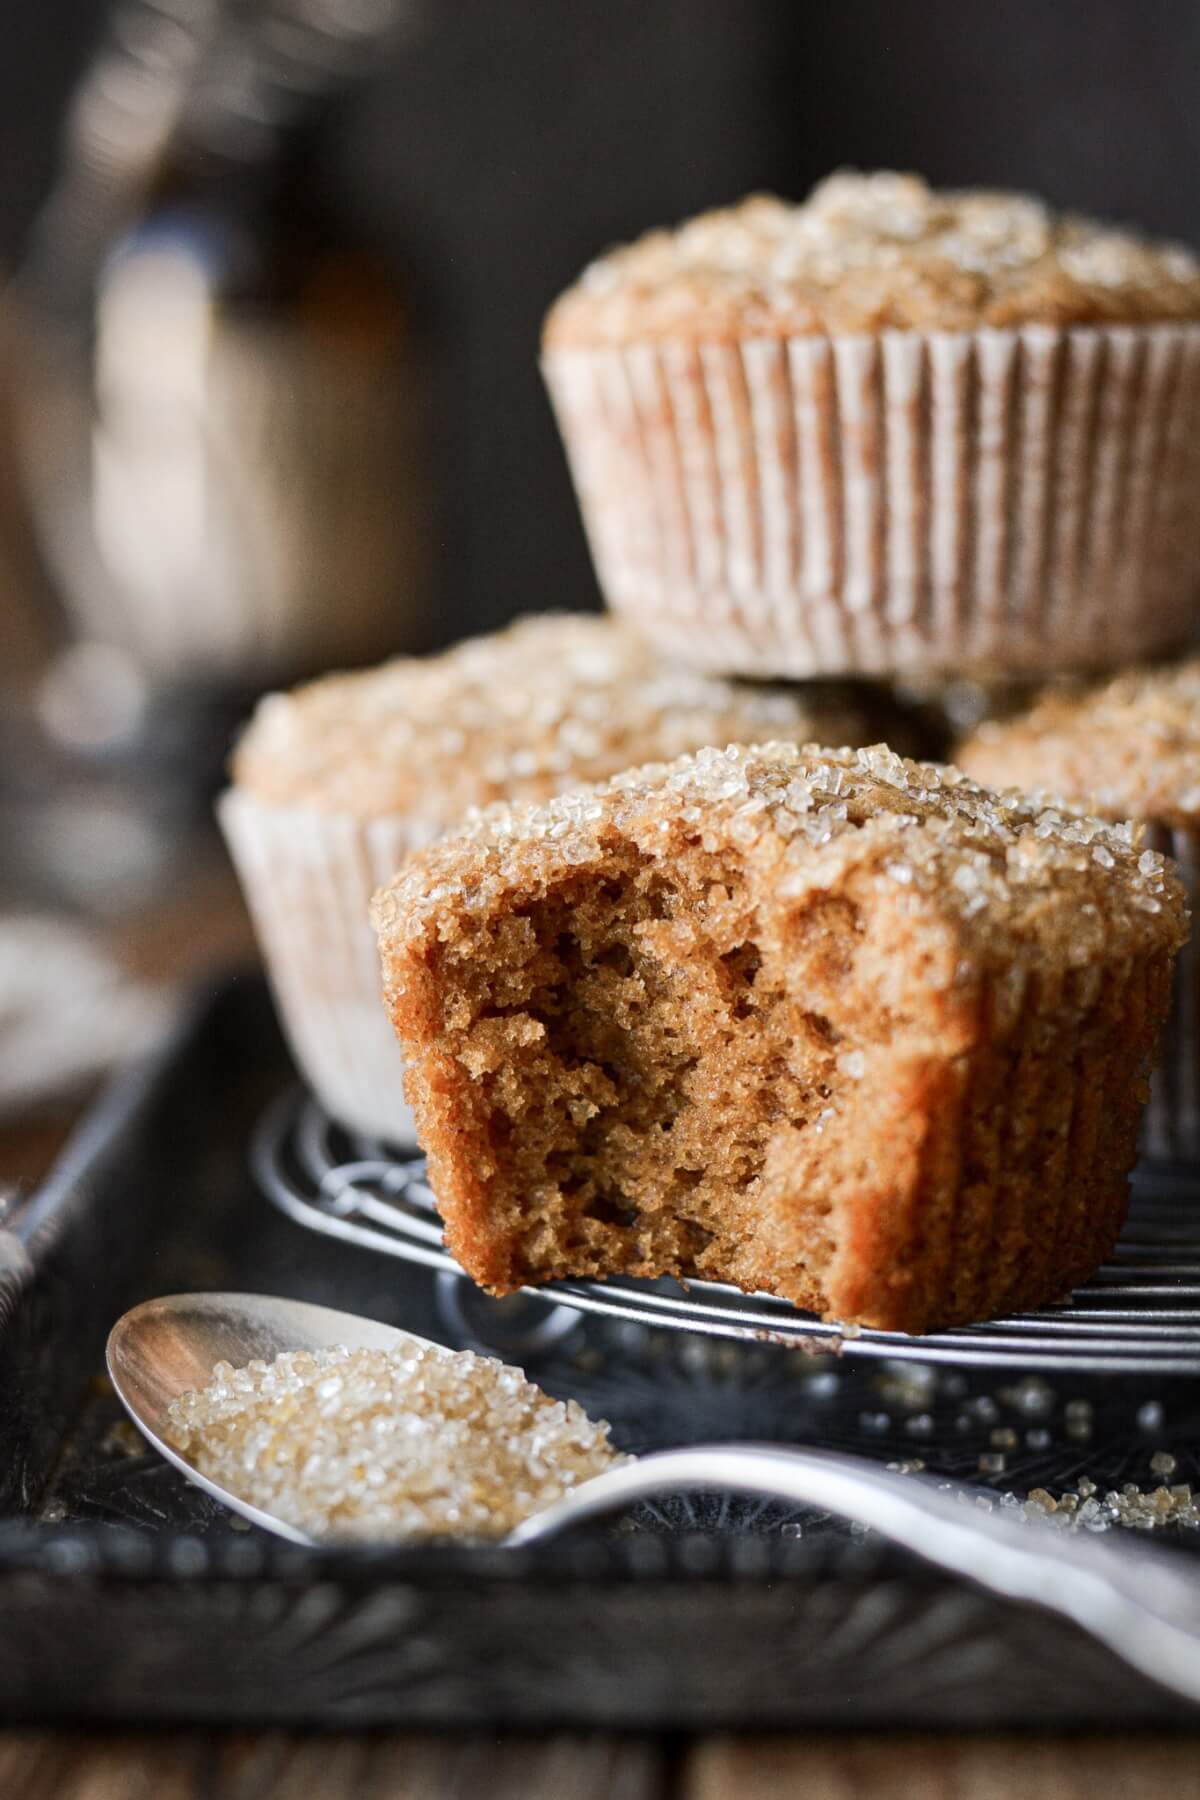 Gingerbread muffin with a bite taken.